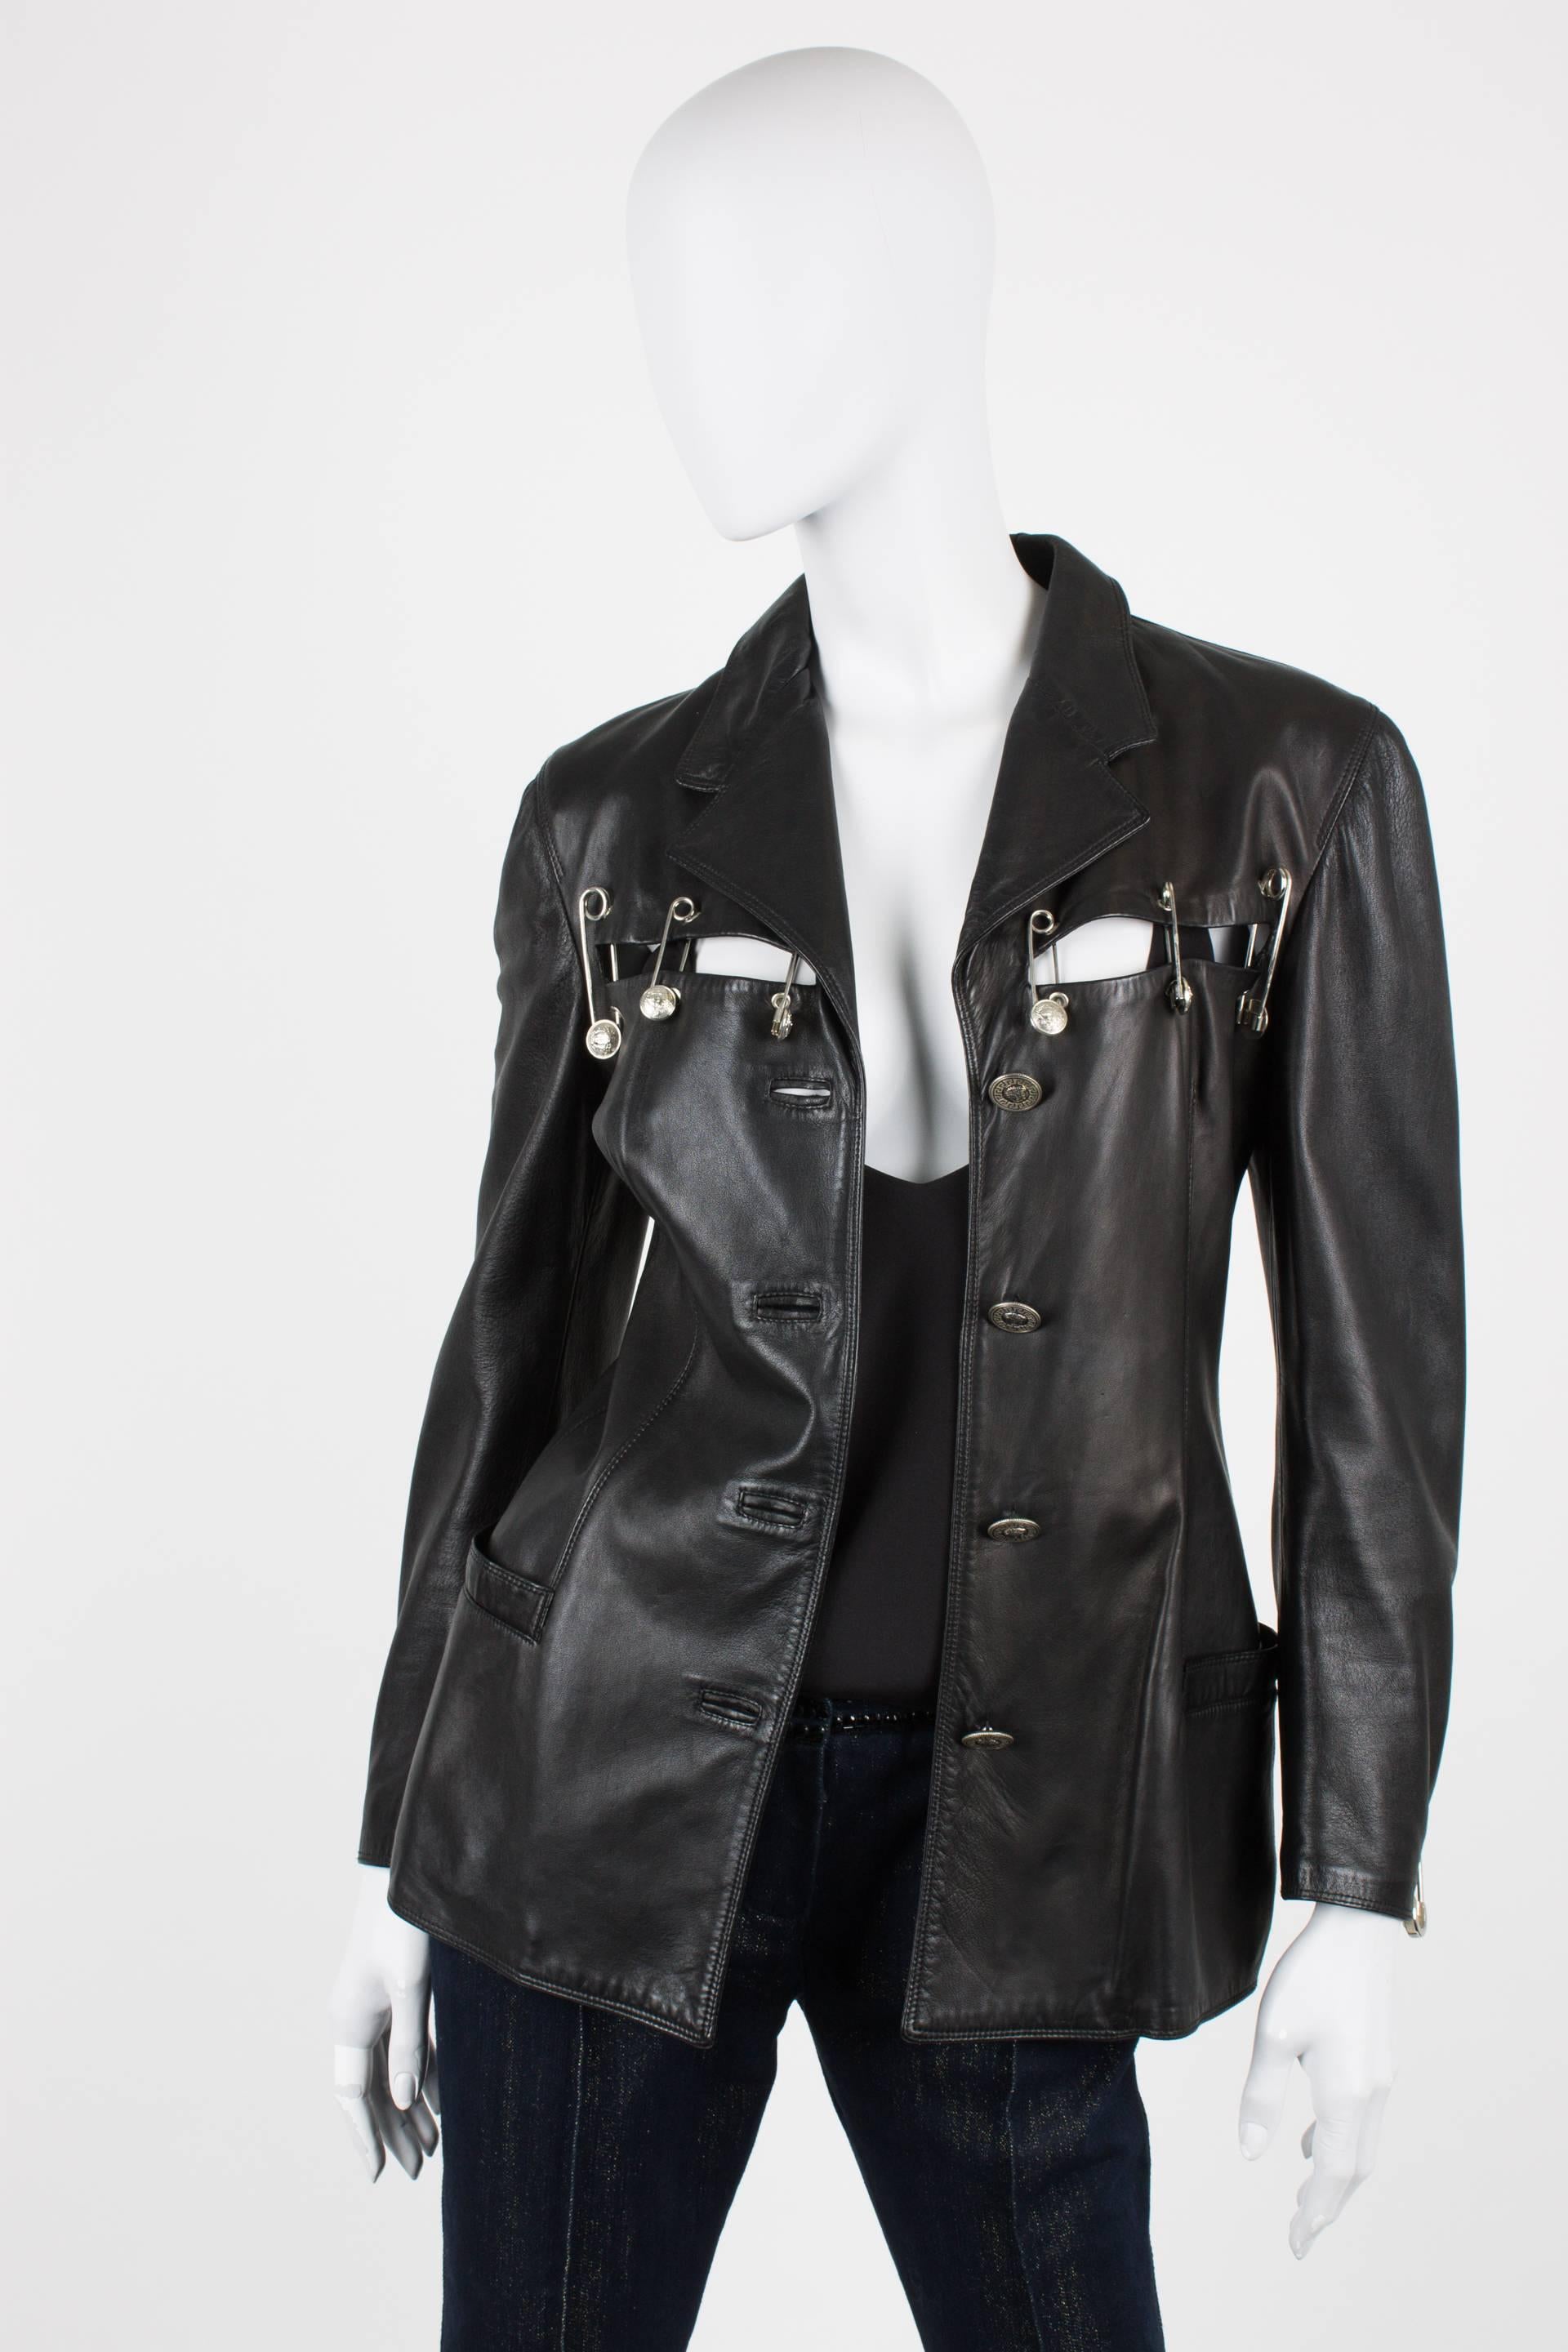 GIANNI VERSACE 1994 Jacket Safety Pins - black leather In Excellent Condition For Sale In Baarn, NL